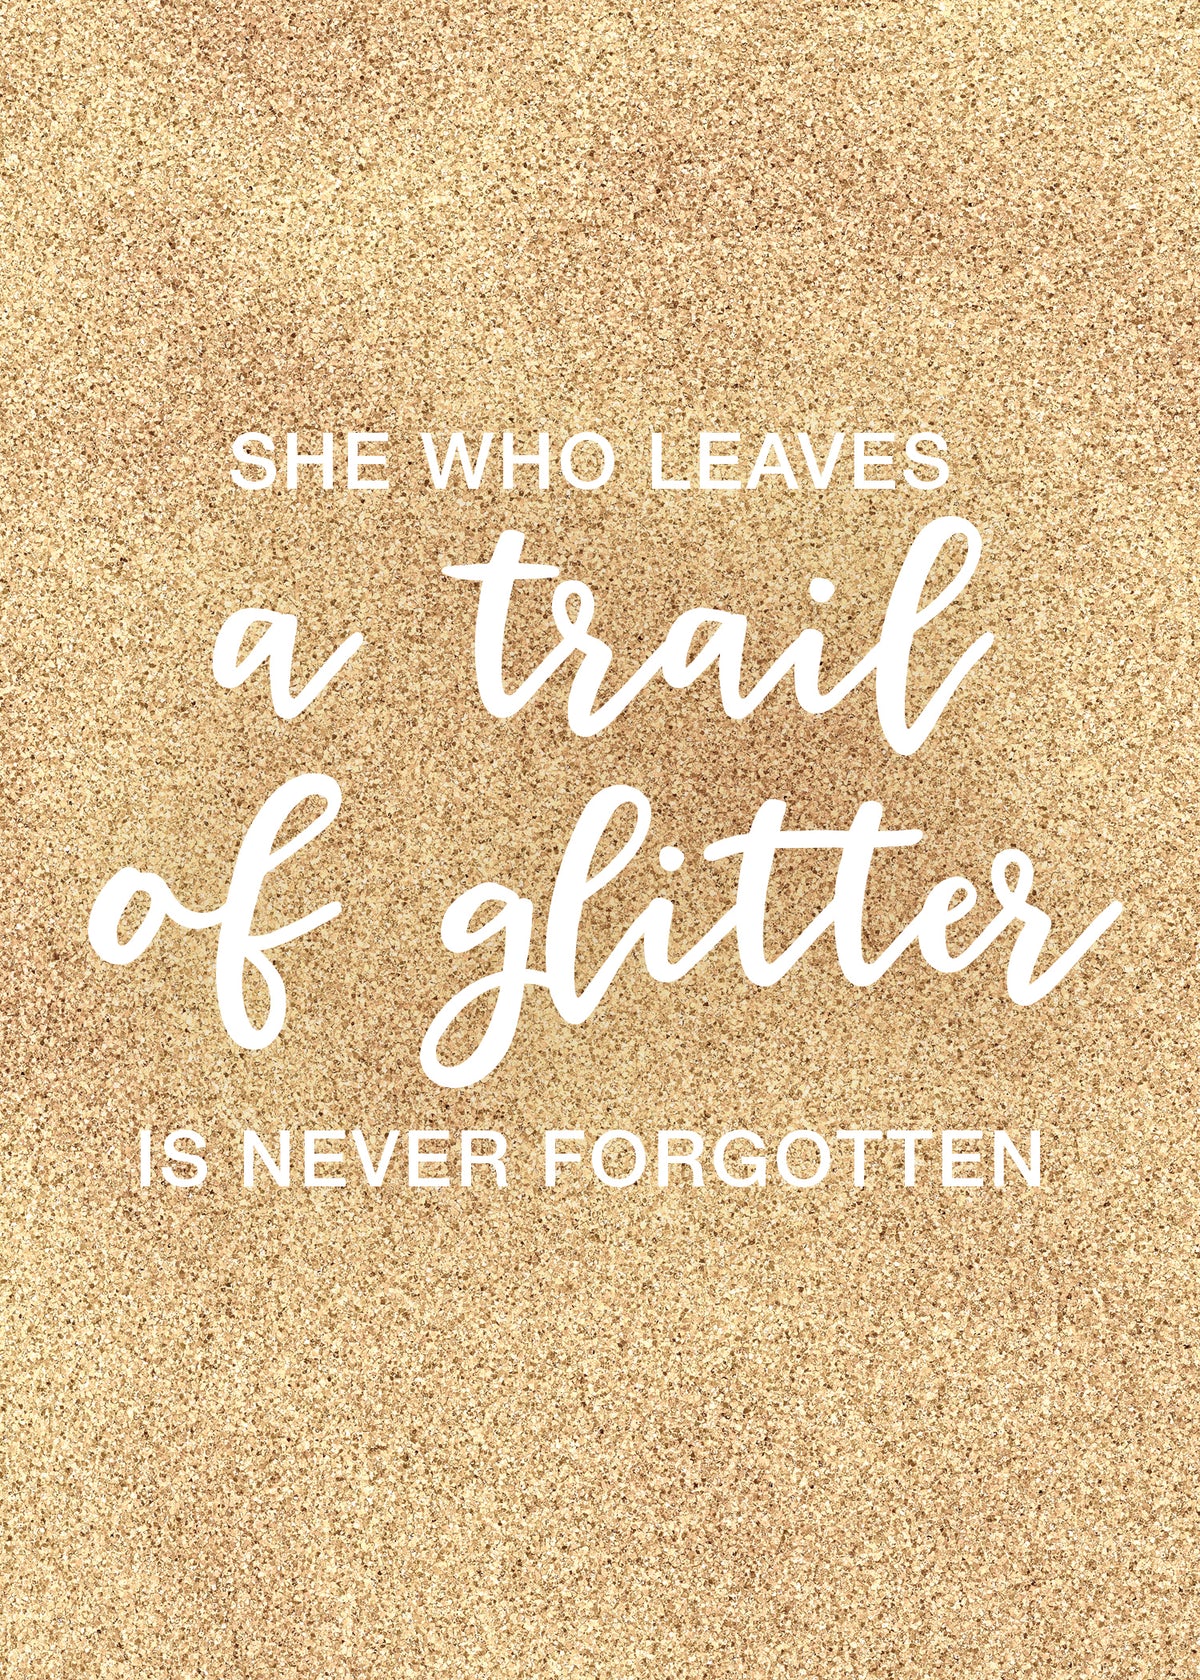 she who leaves a trail of glitter is never forgotten quote